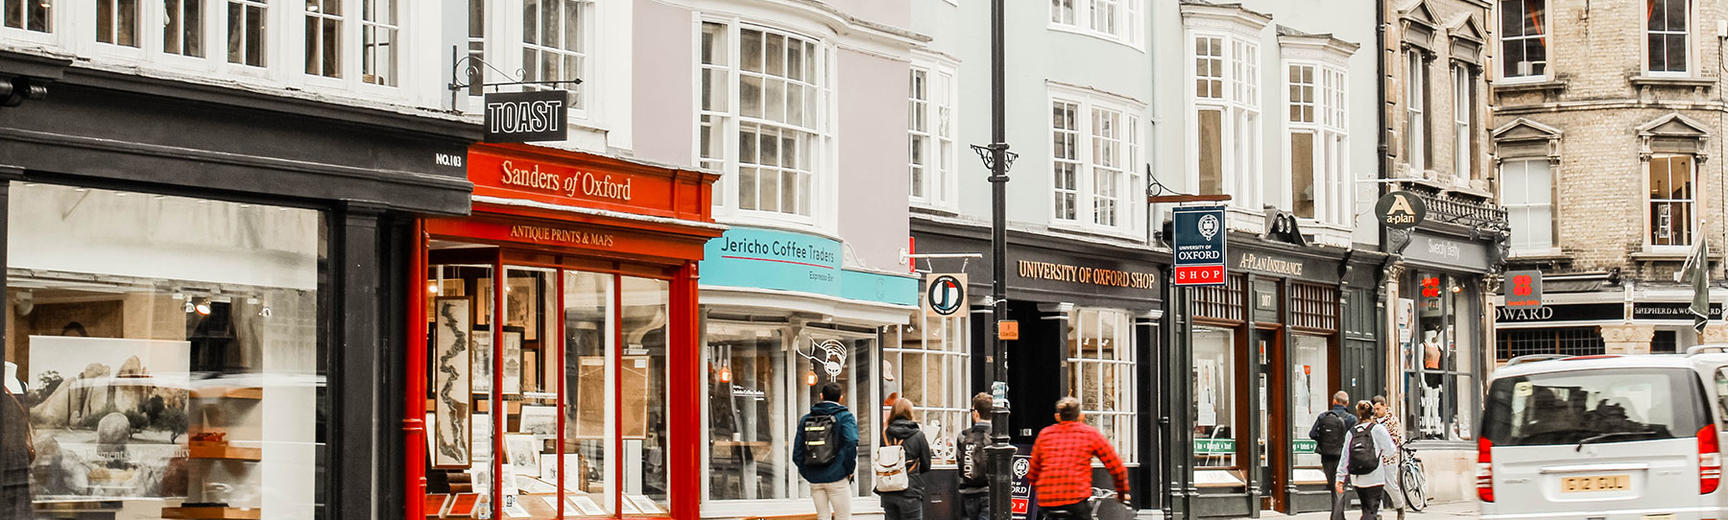 Image of Oxford city street including shops, cyclist, cars and pedestrians